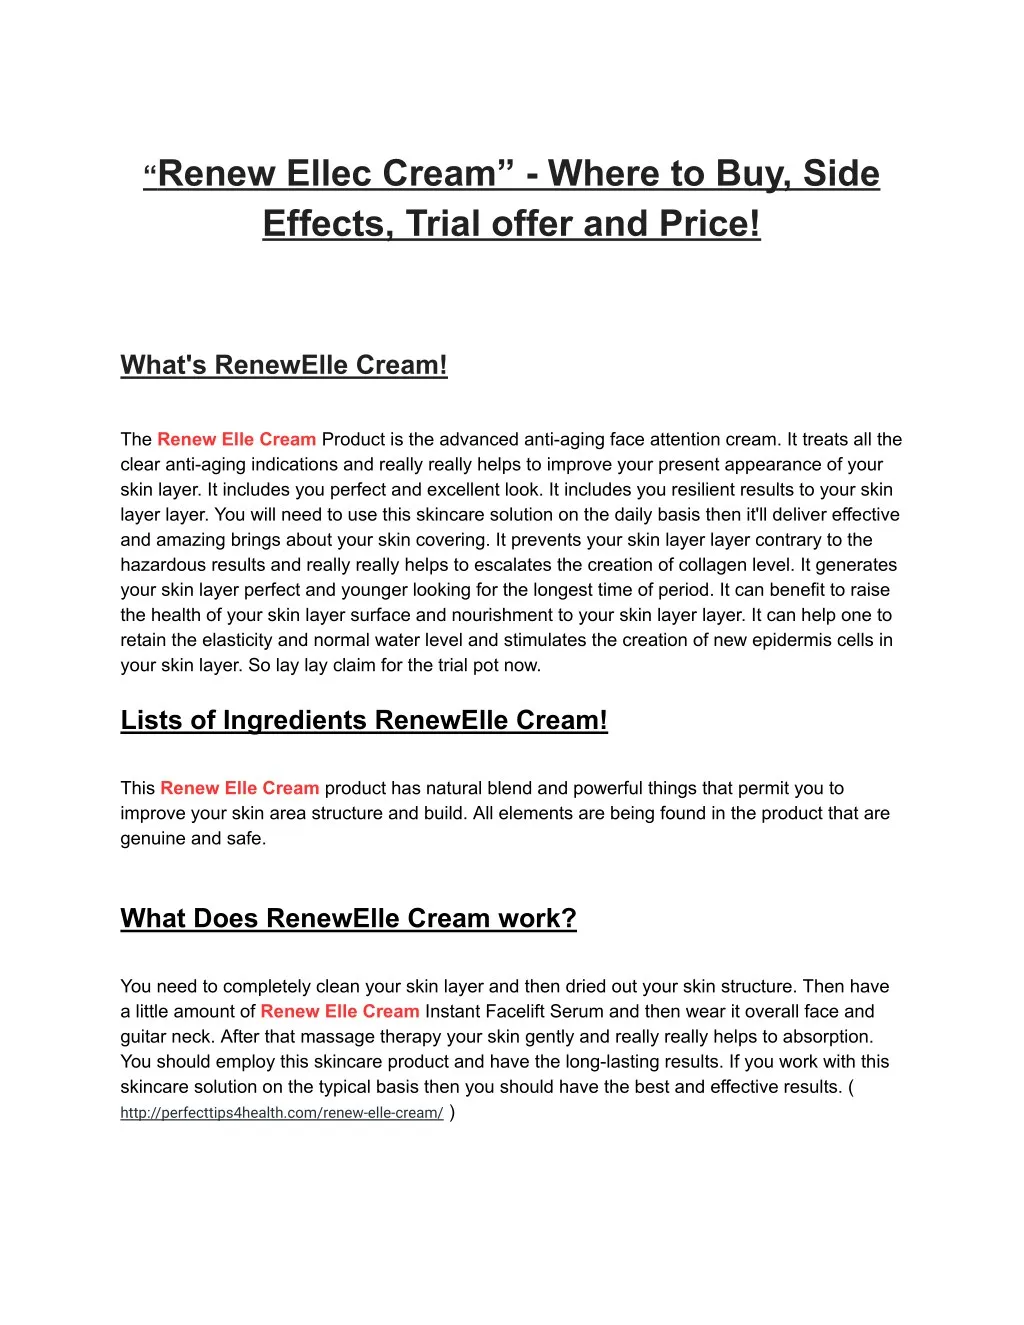 renew ellec cream where to buy side effects trial